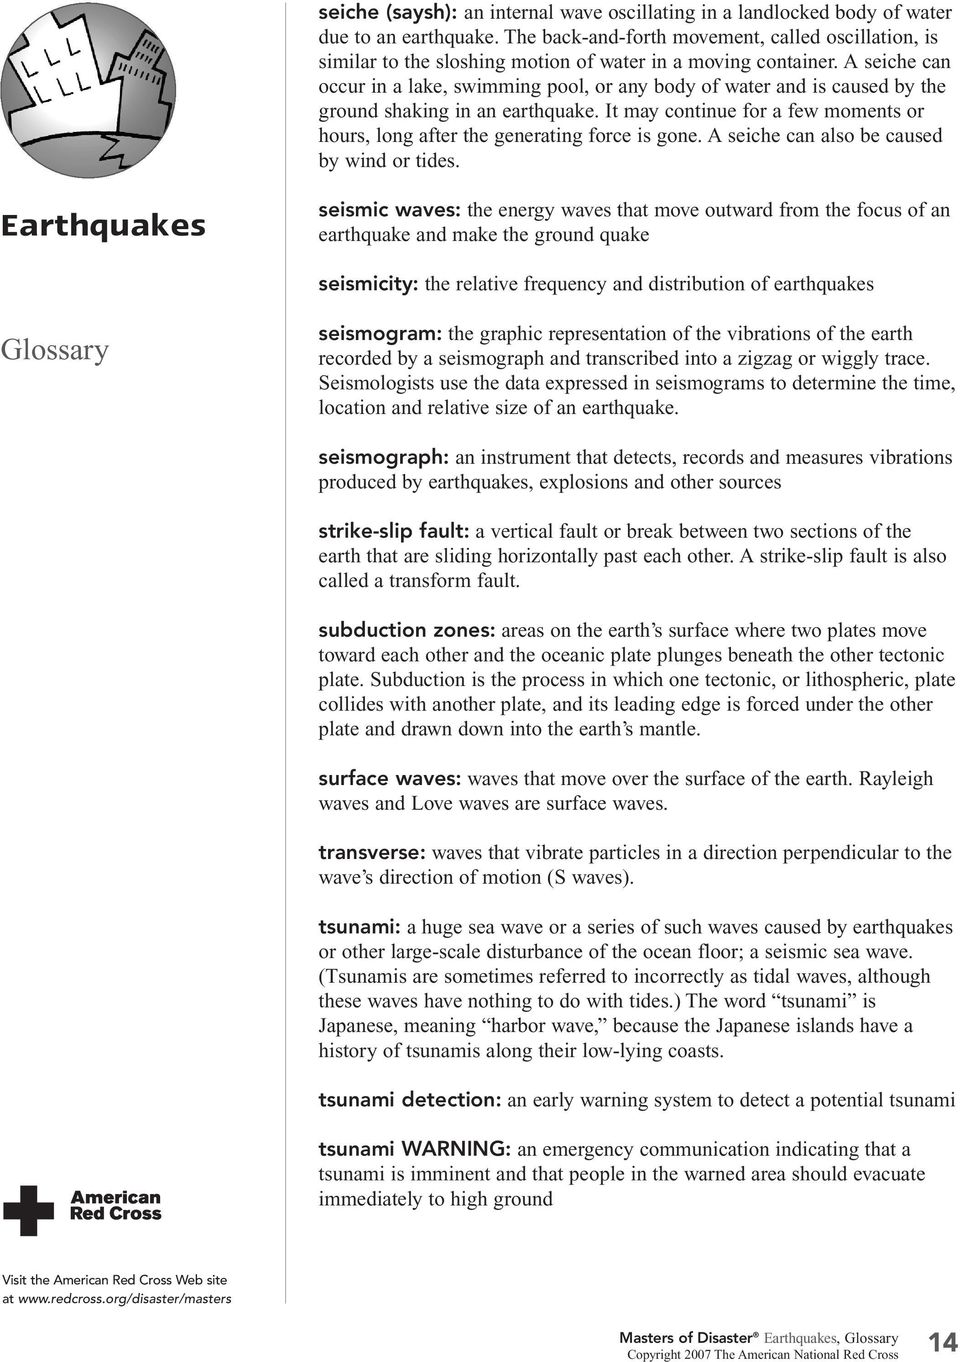 A seiche can occur in a lake, swimming pool, or any body of water and is caused by the ground shaking in an earthquake.